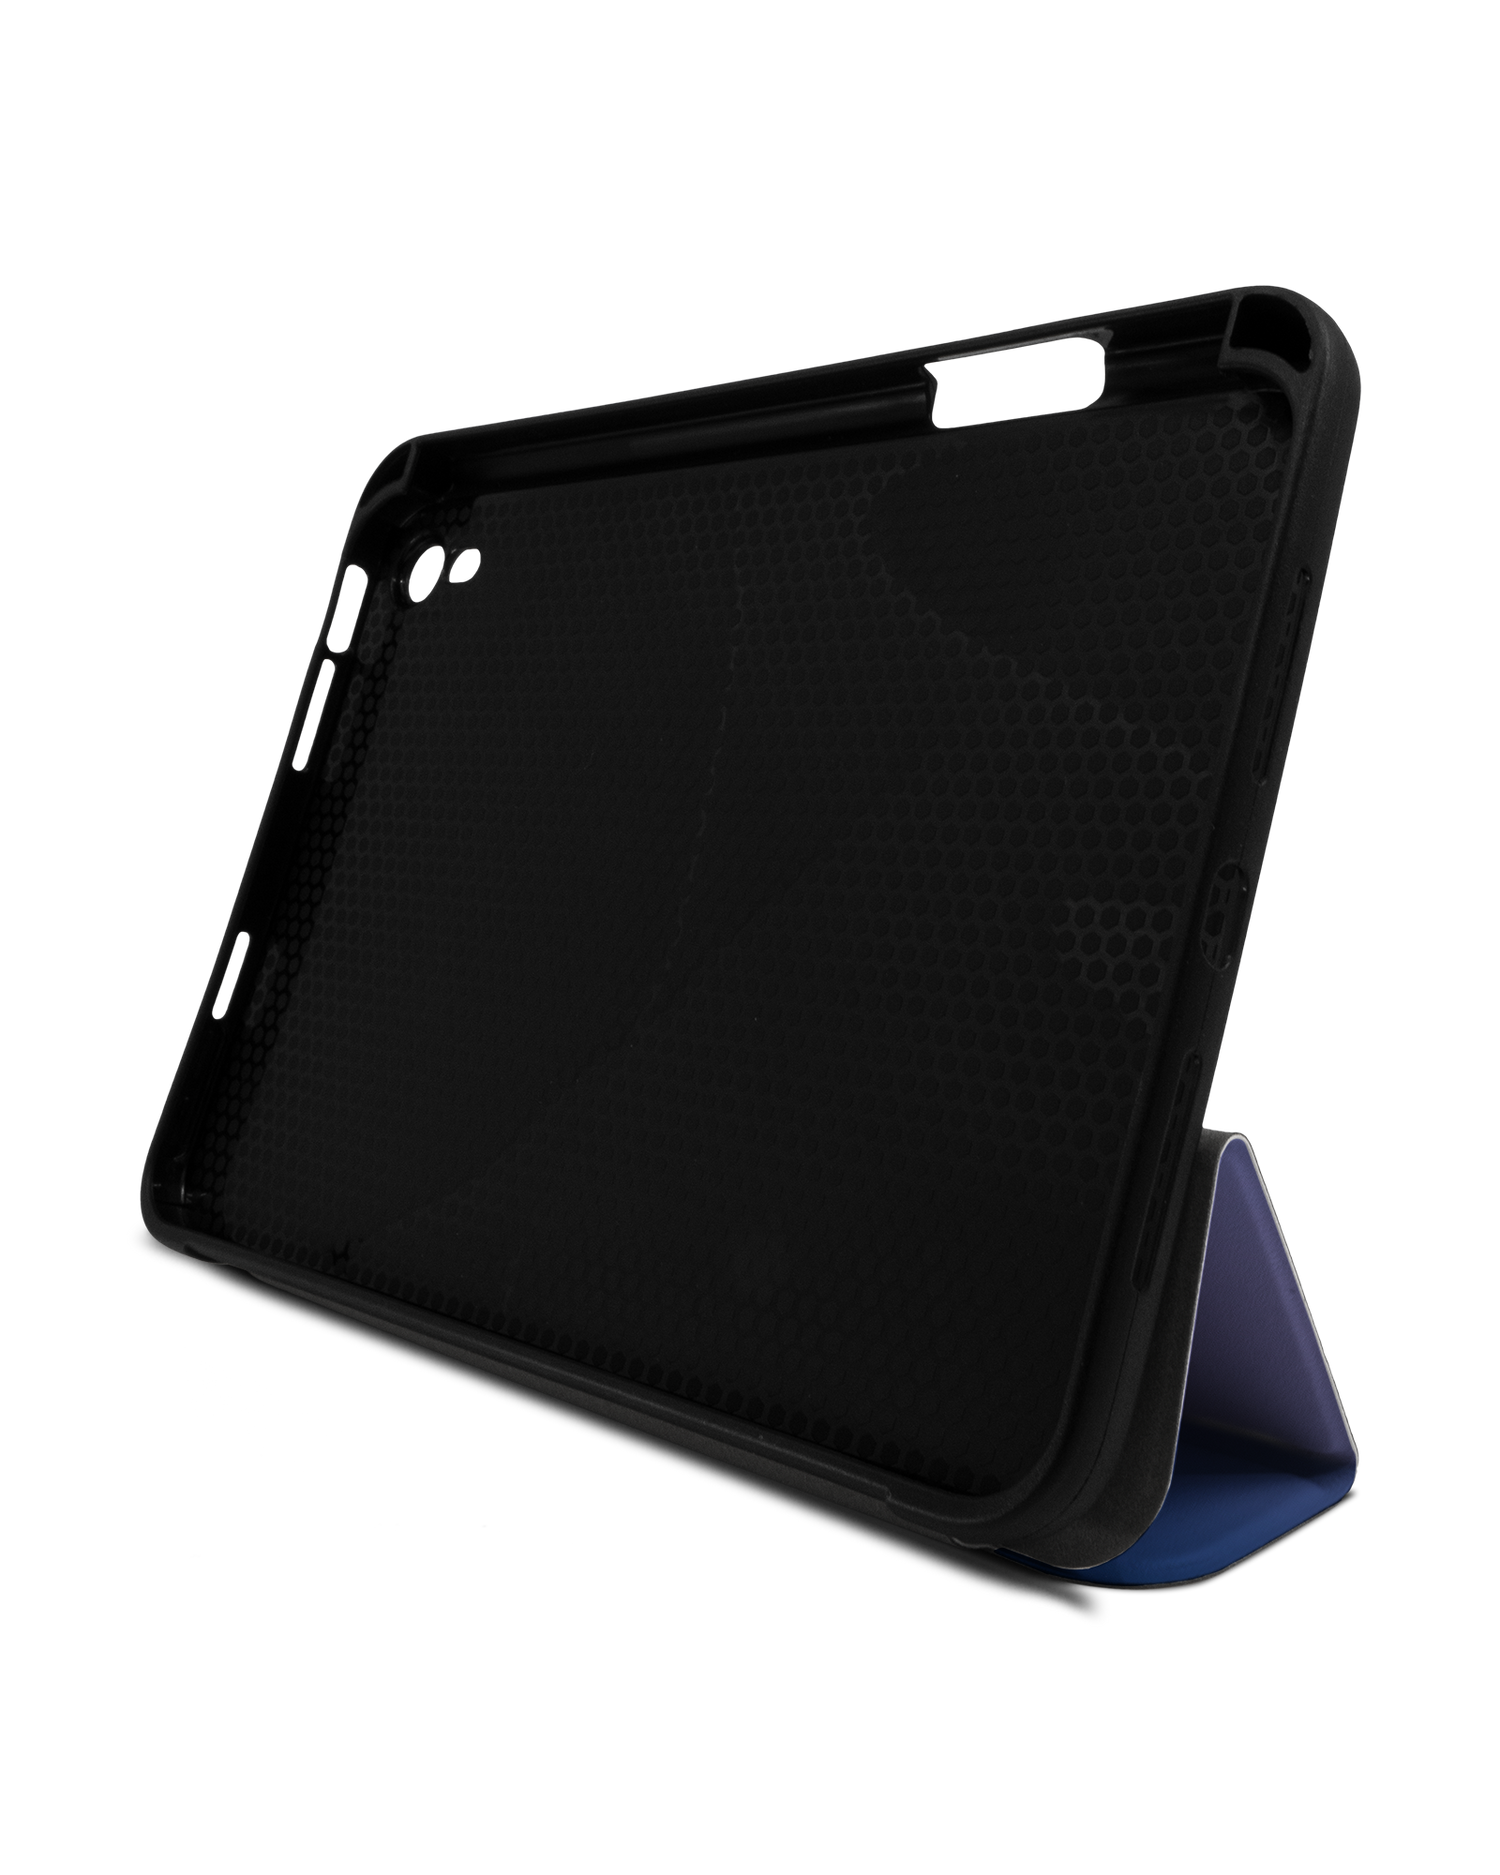 Blueberry iPad Case with Pencil Holder Apple iPad mini 6 (2021): Set up in landscape format (front view)